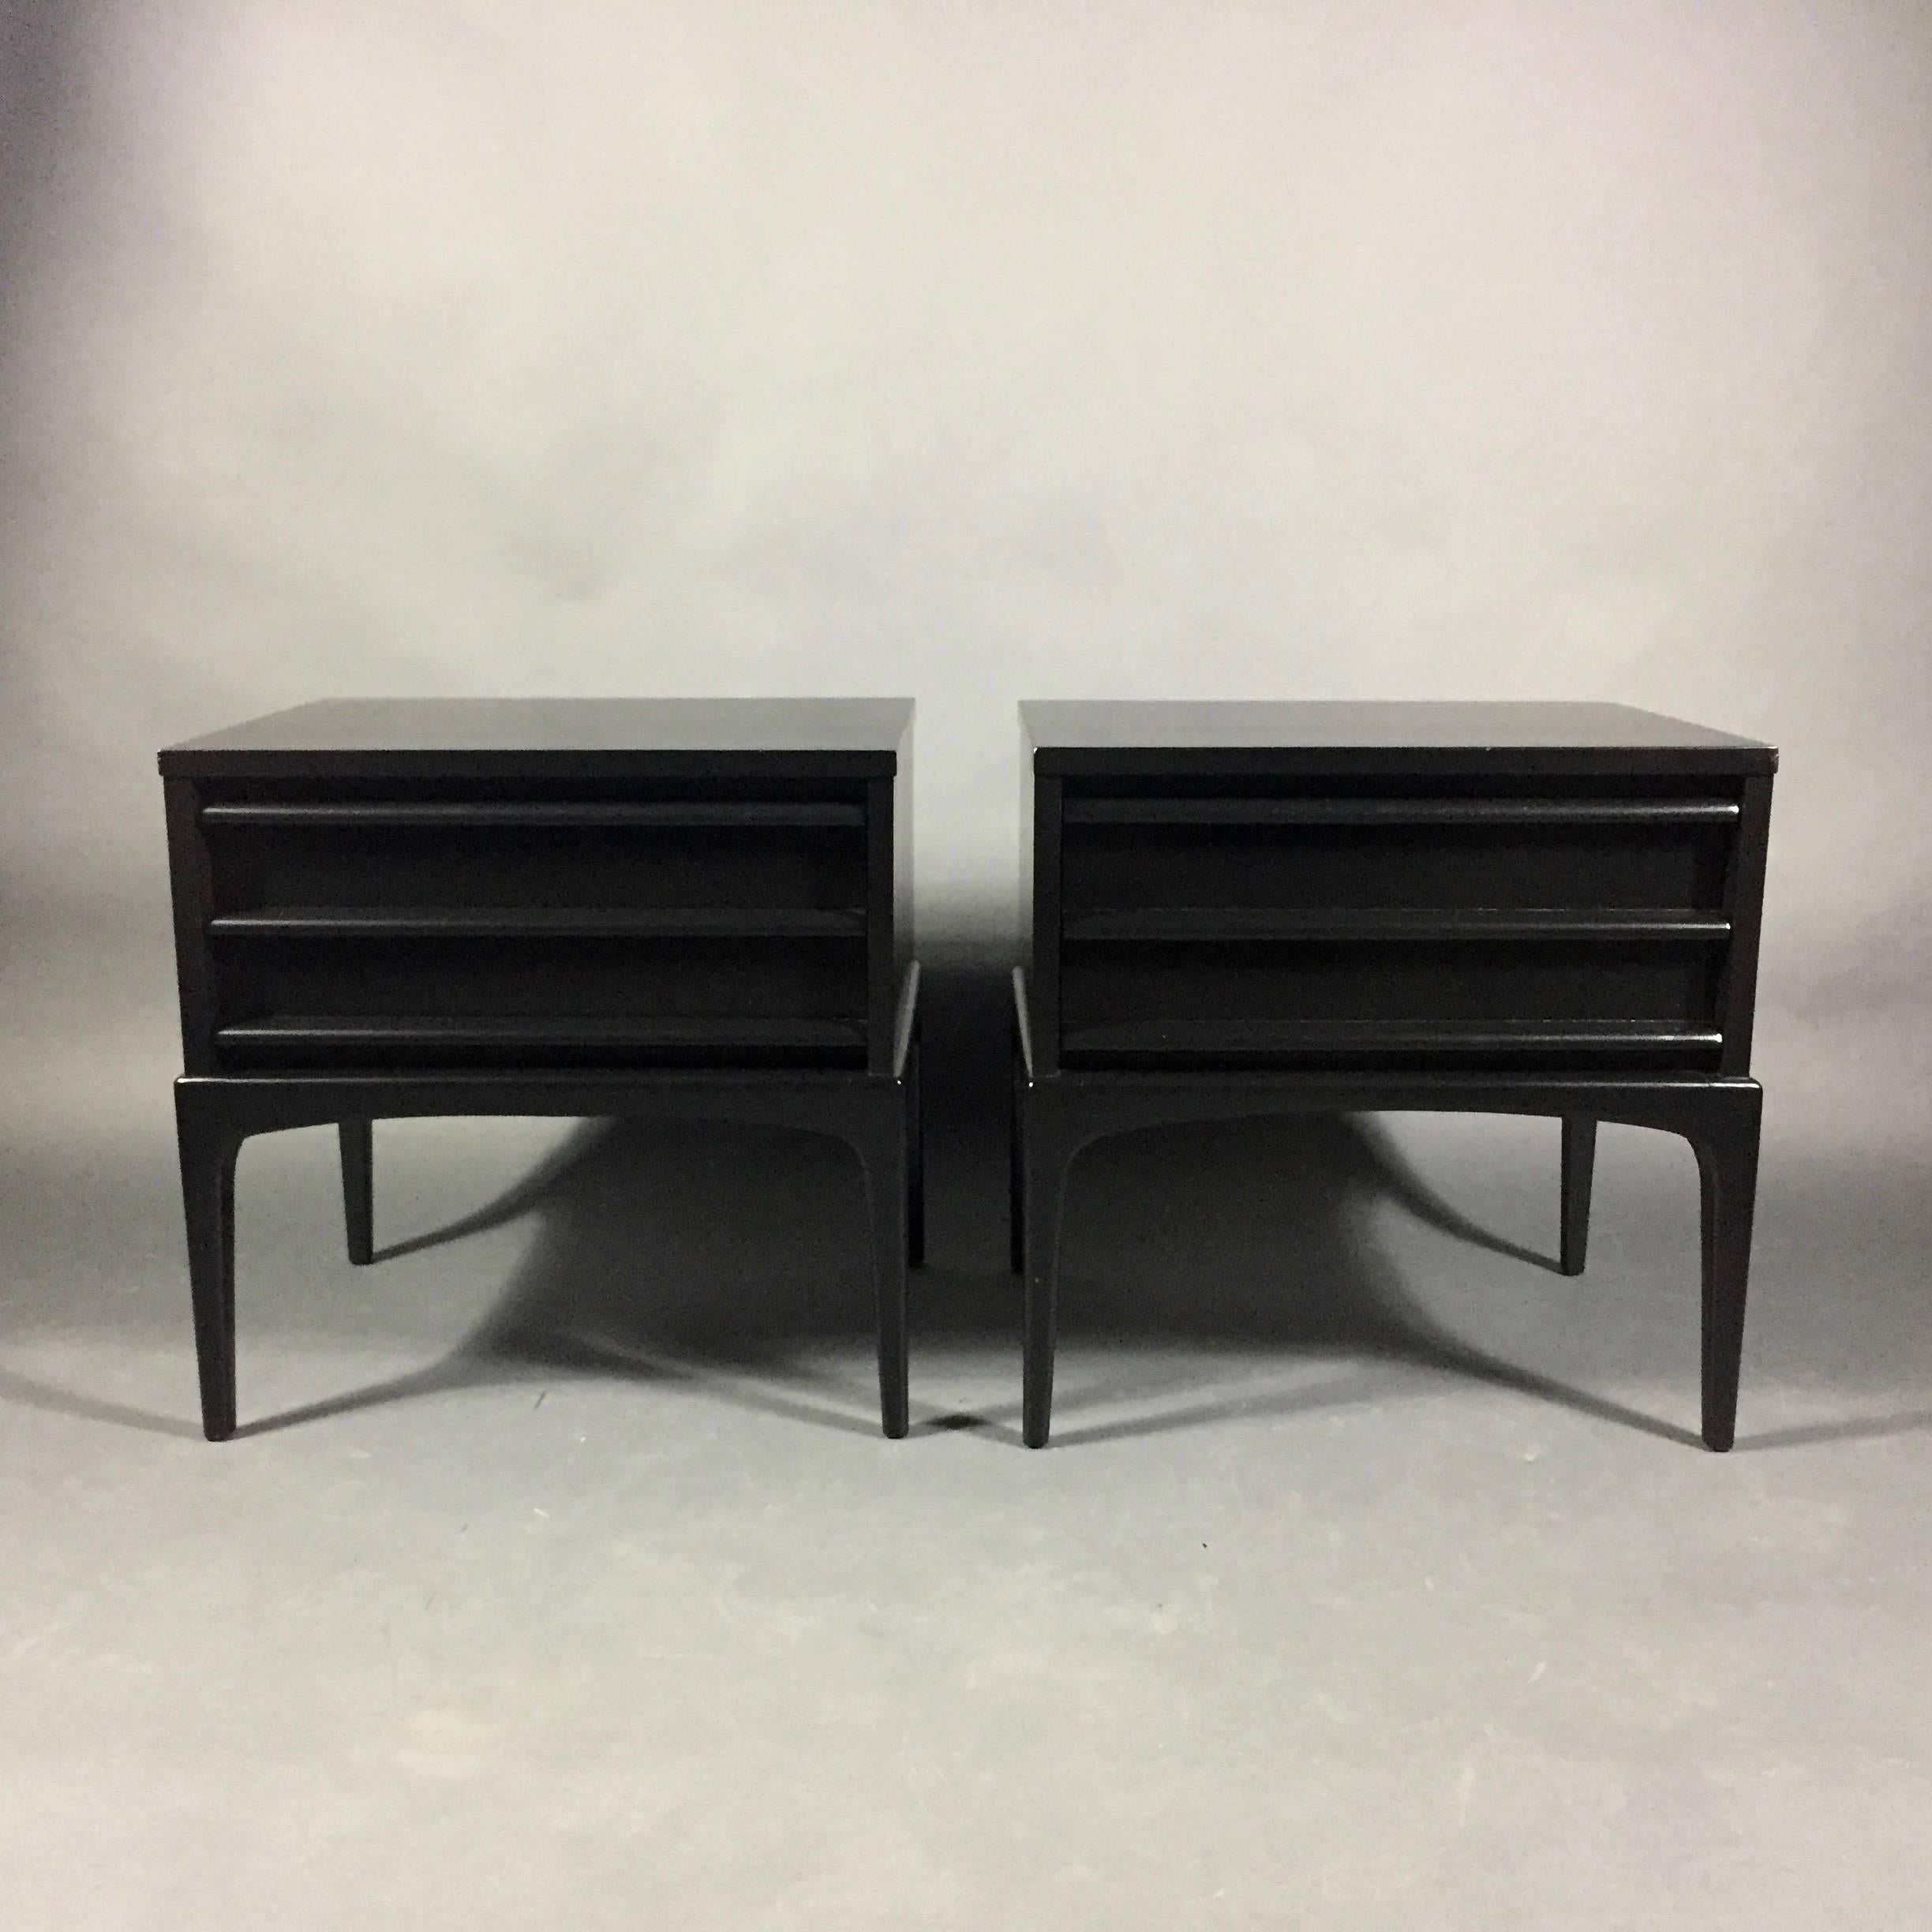 We recently black lacquered with texture this simple and chic pair of American Modern midcentury Lane nightstands or end tables that were originally a dark stained Walnut. Each piece has one drawer with three profiled end-to-end drawer pulls that